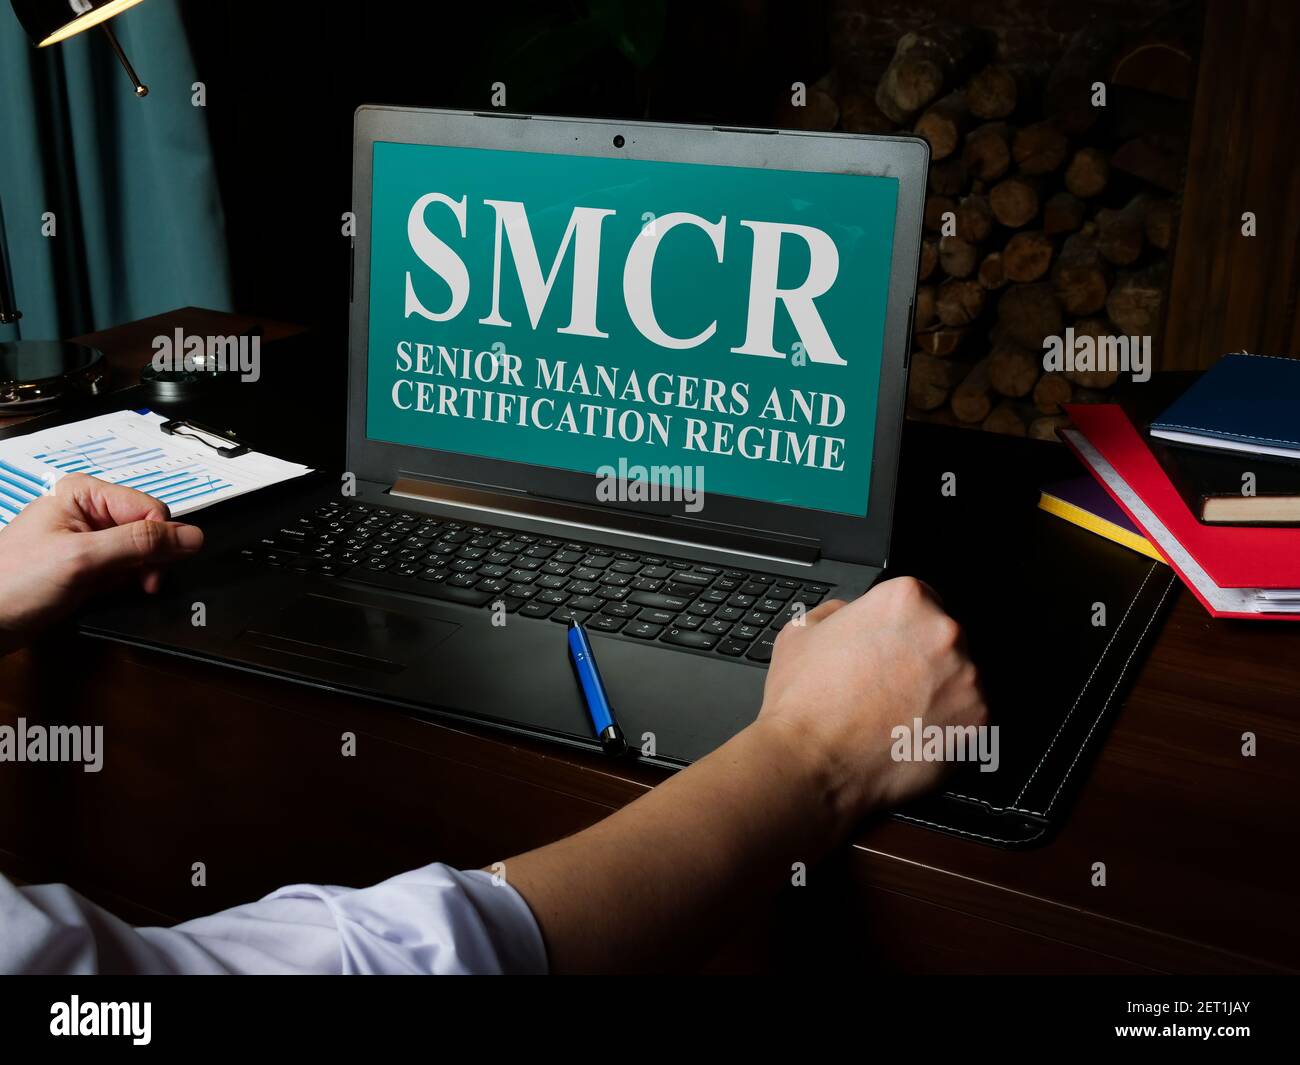 Senior Managers and Certification Regime SMCR on the laptop. Stock Photo